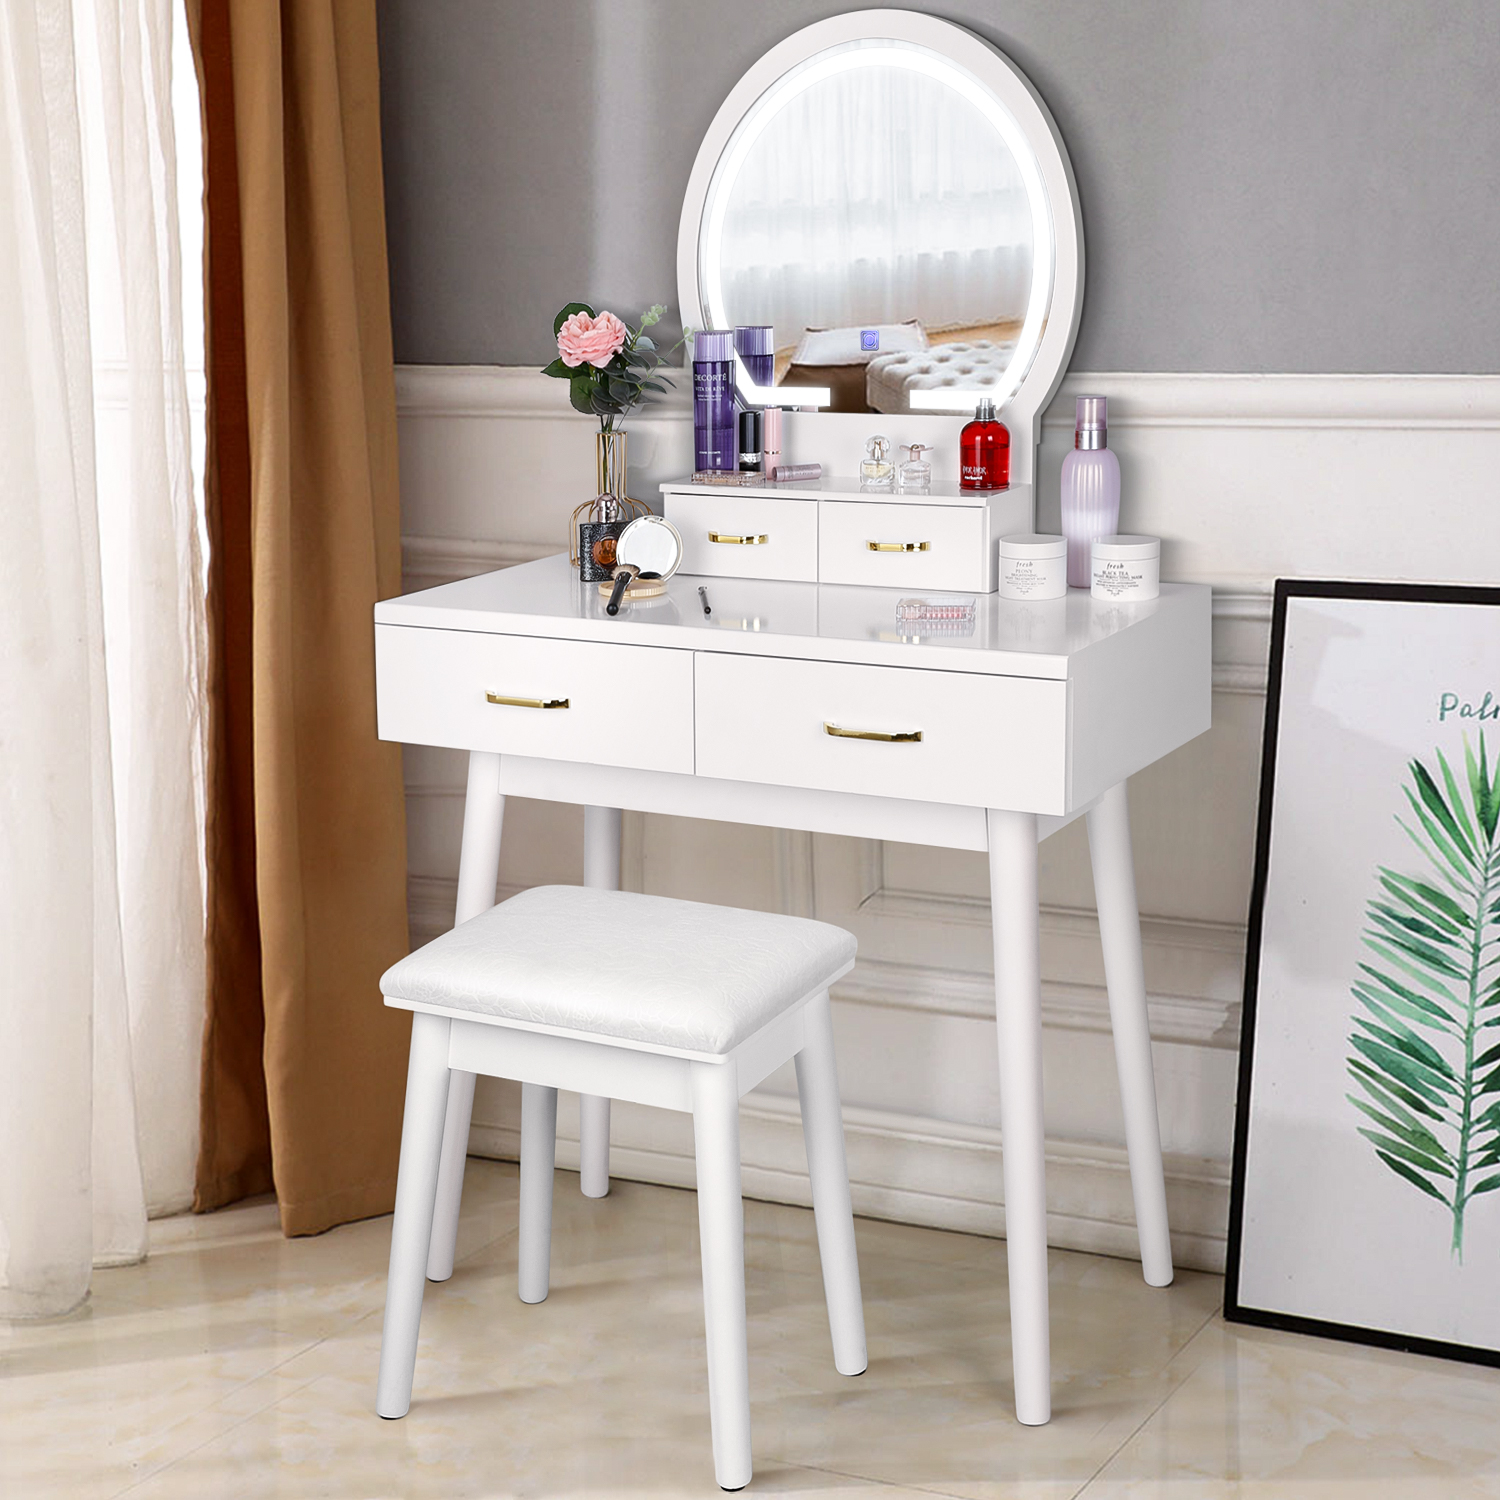 

Amzdeal Vanity Desk with Lighted Mirror, Makeup Dressing Table 3 Color Lighting Modes Adjustable Brightness, 4 Drawers Cushioned Stool for Bedroom - White